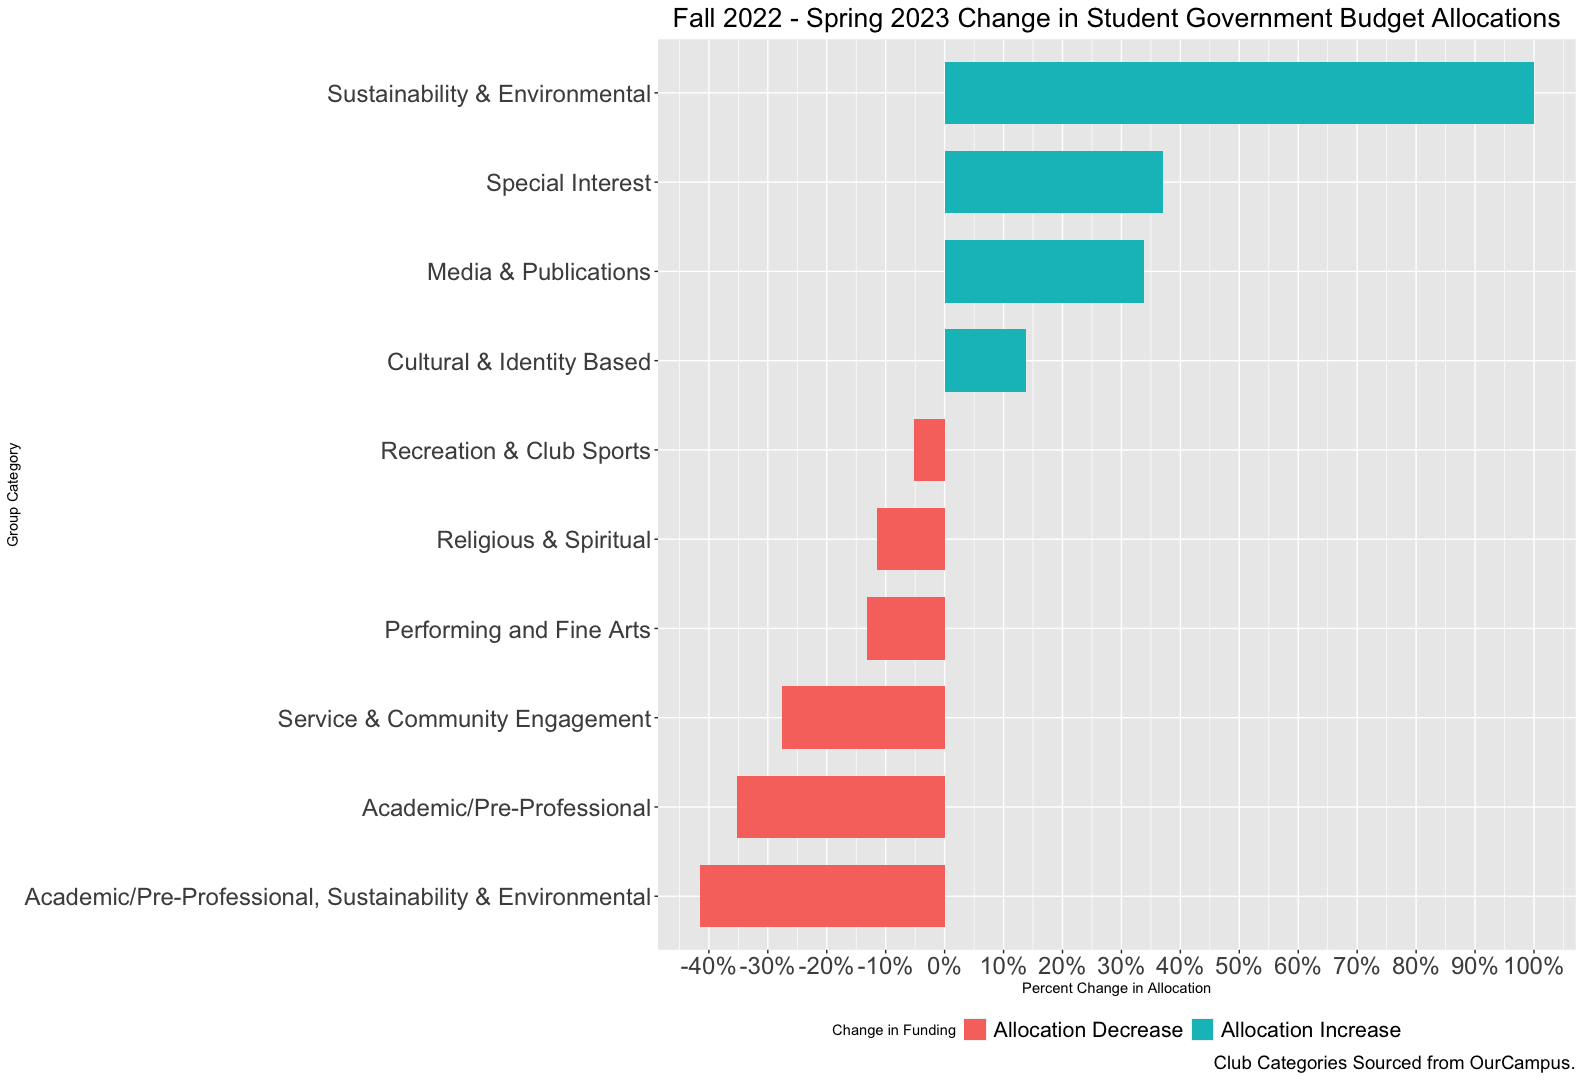 Percent change in funding allocation from Fall 2022 semester - Spring 2023 semester